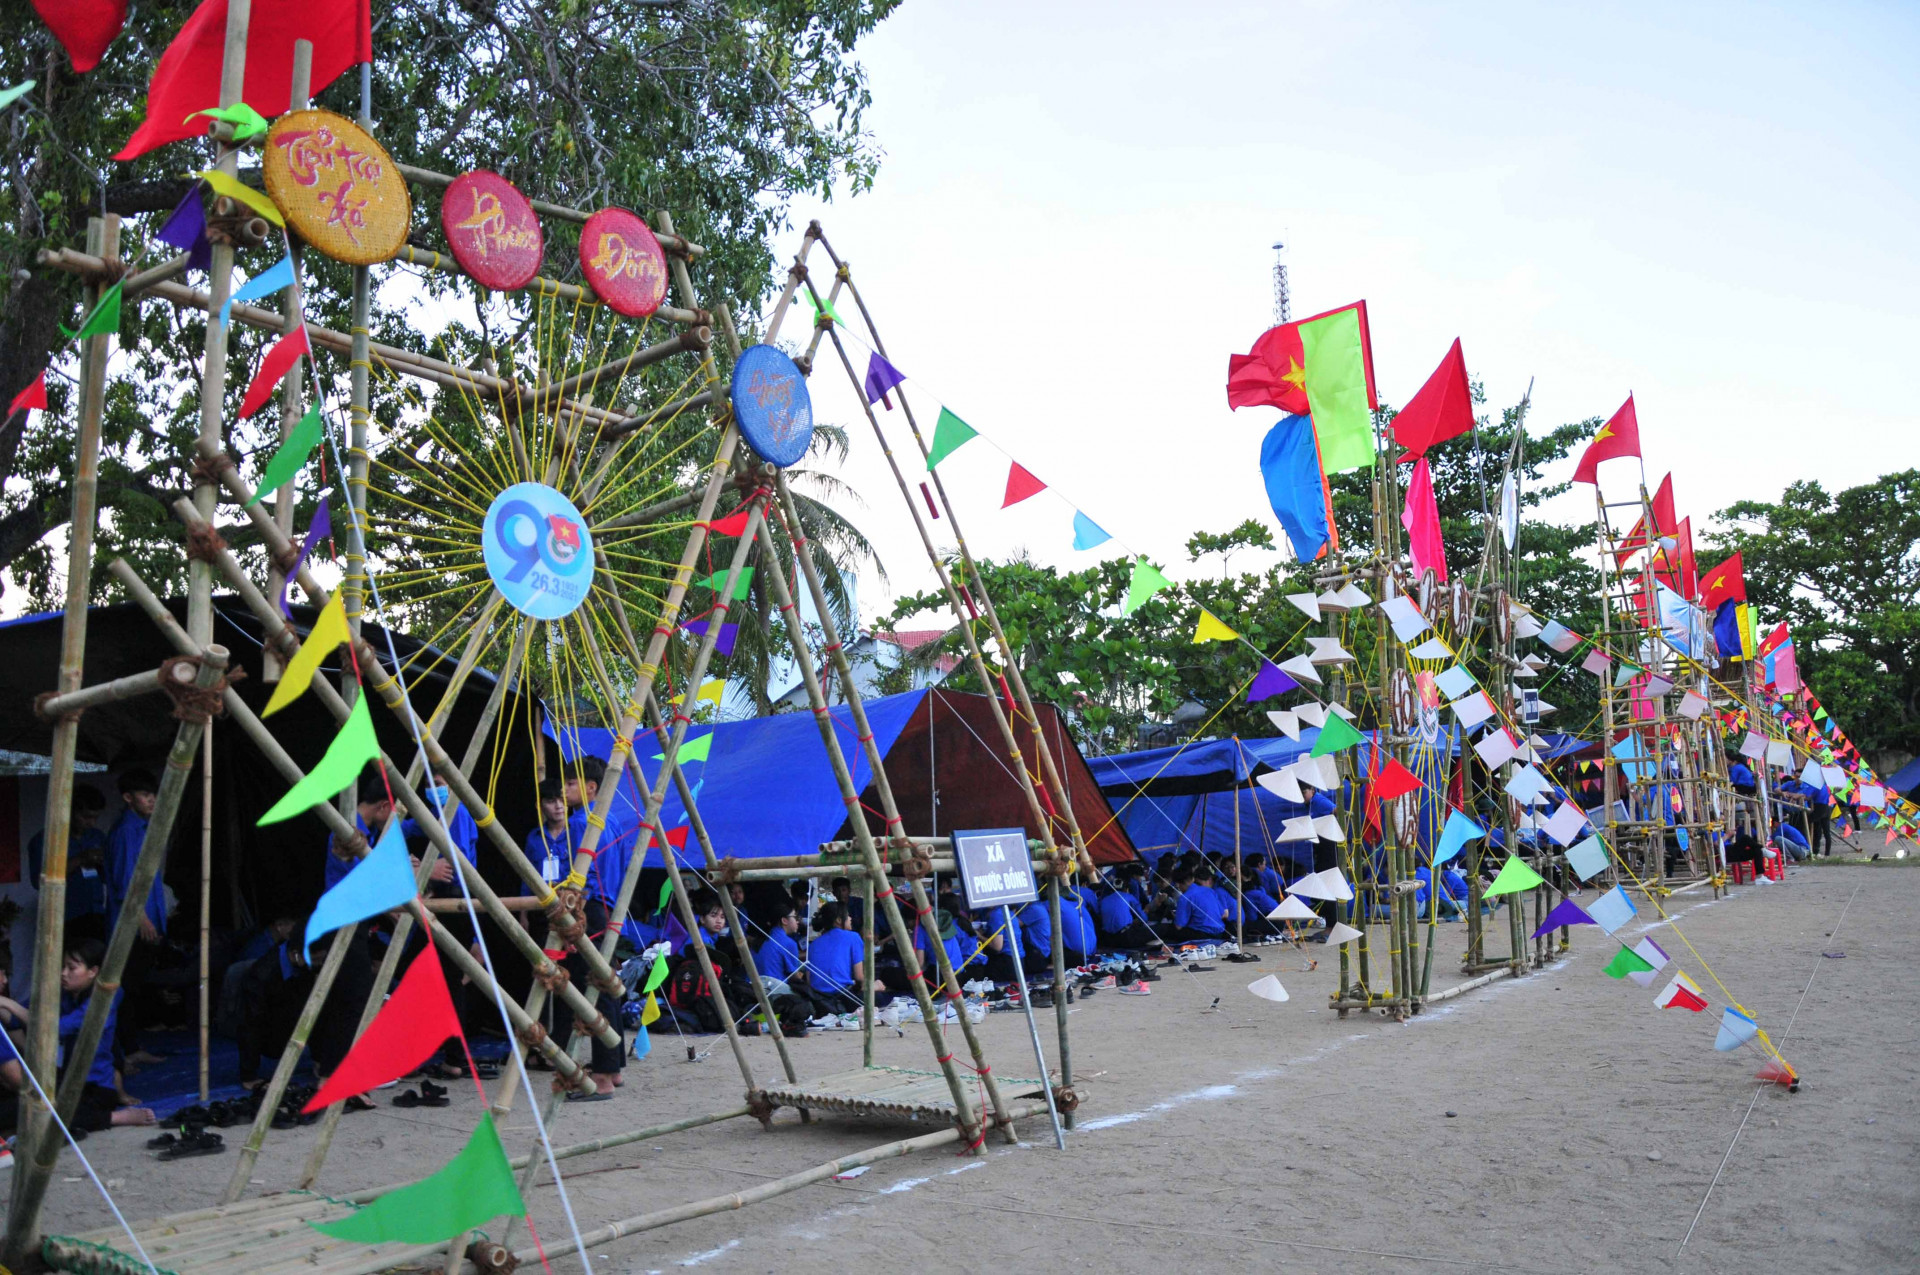 Tents with colorfully-decorated gates